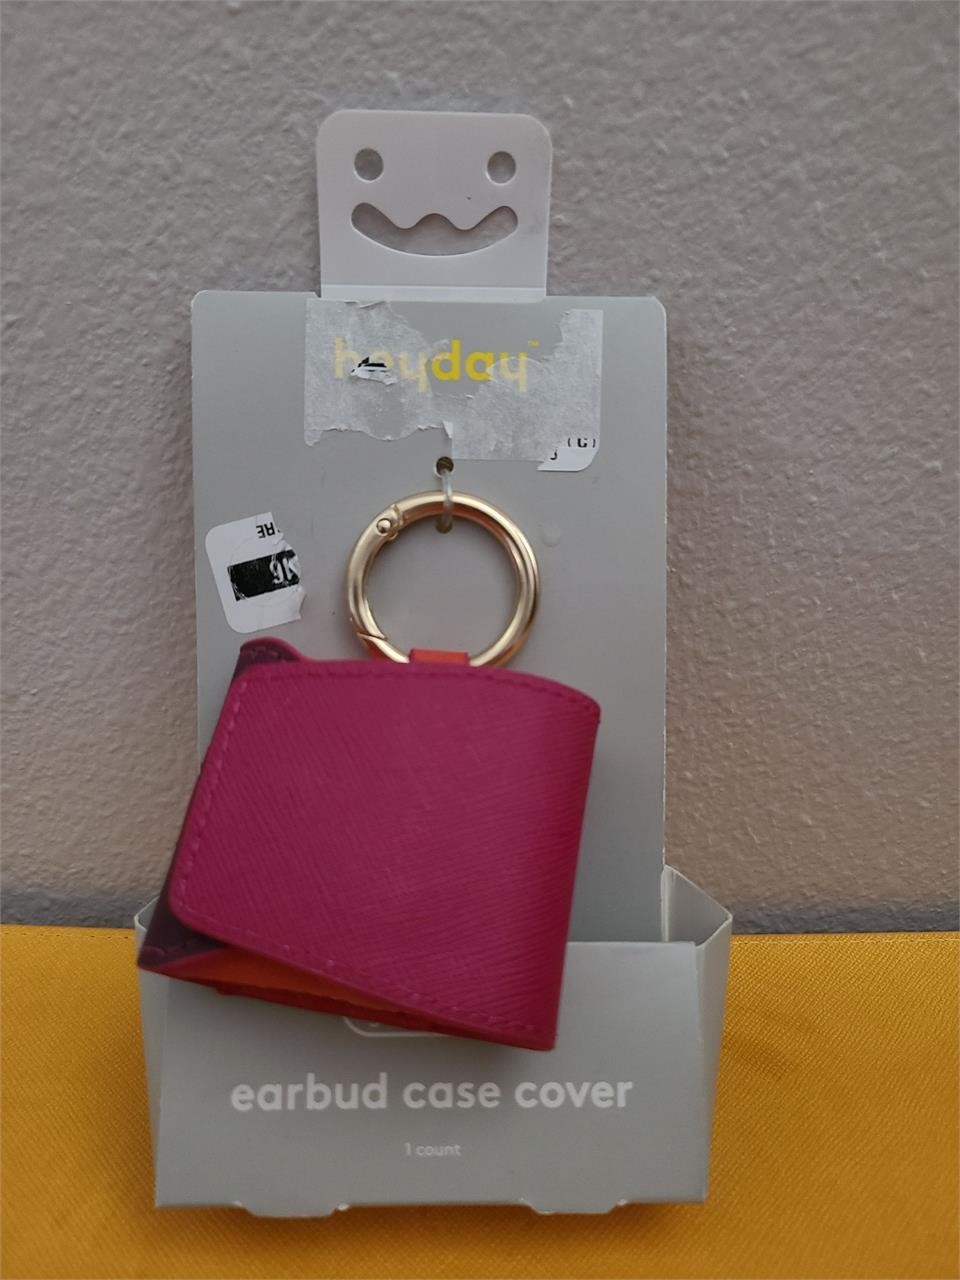 Earbud case cover